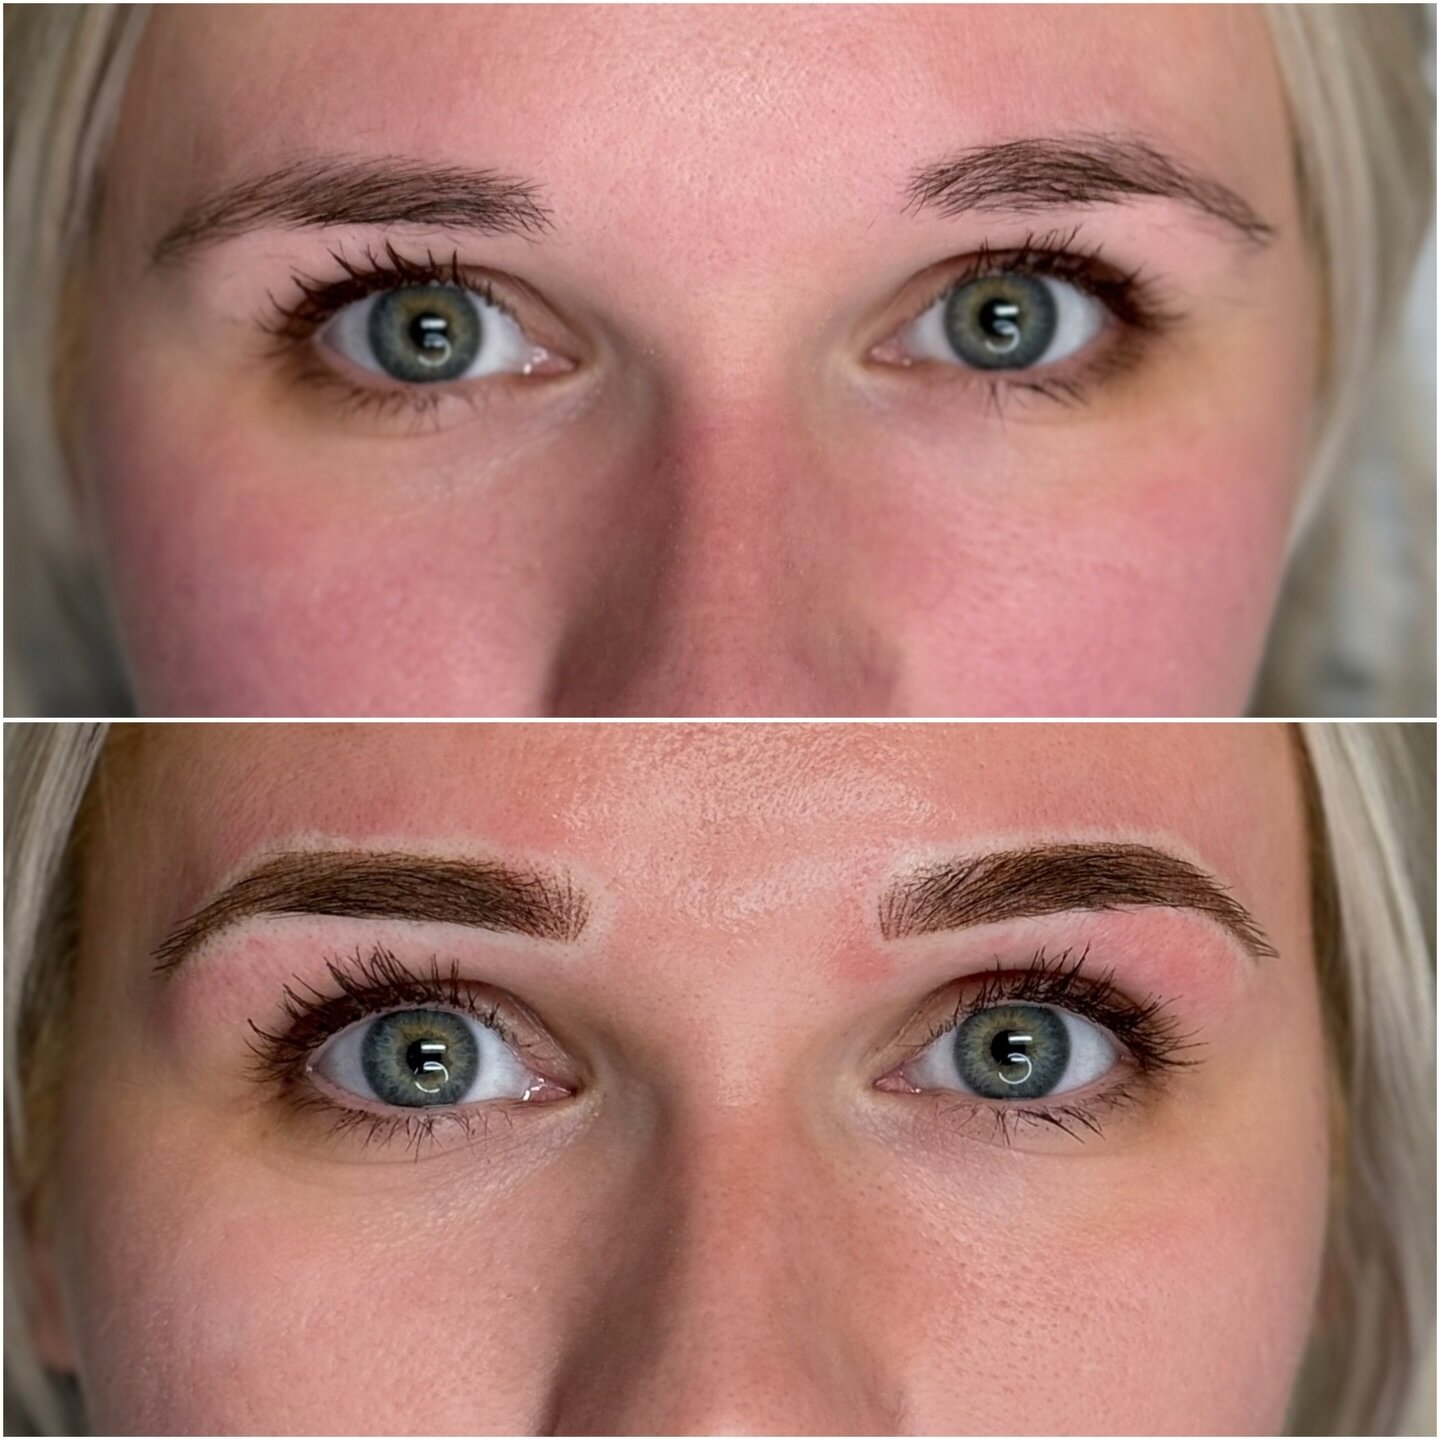 Elongated these brows by adding nano hair strokes to the front. Lifted the shape with a proper shaping 👌 Corrected asymmetry and added a little more height to the peak with powder in the body and tail ✨
.
.
.
.
.
.
#brows #entrepeneur #followme #exp